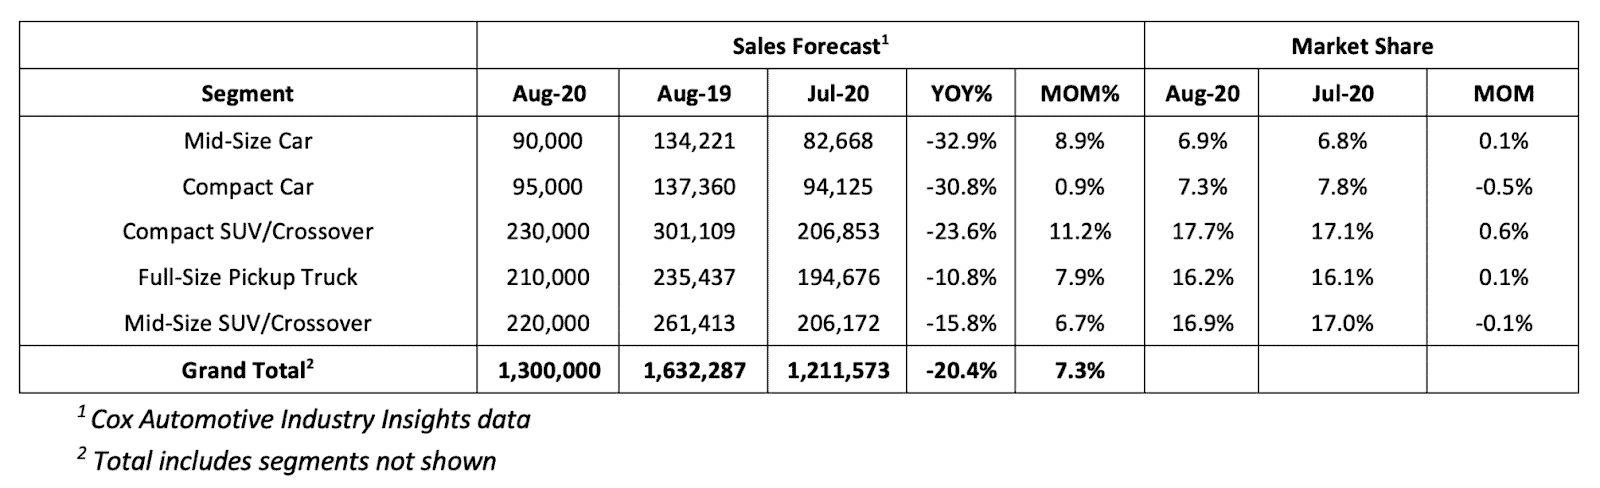 Sales Forecast and Market Share Percentage